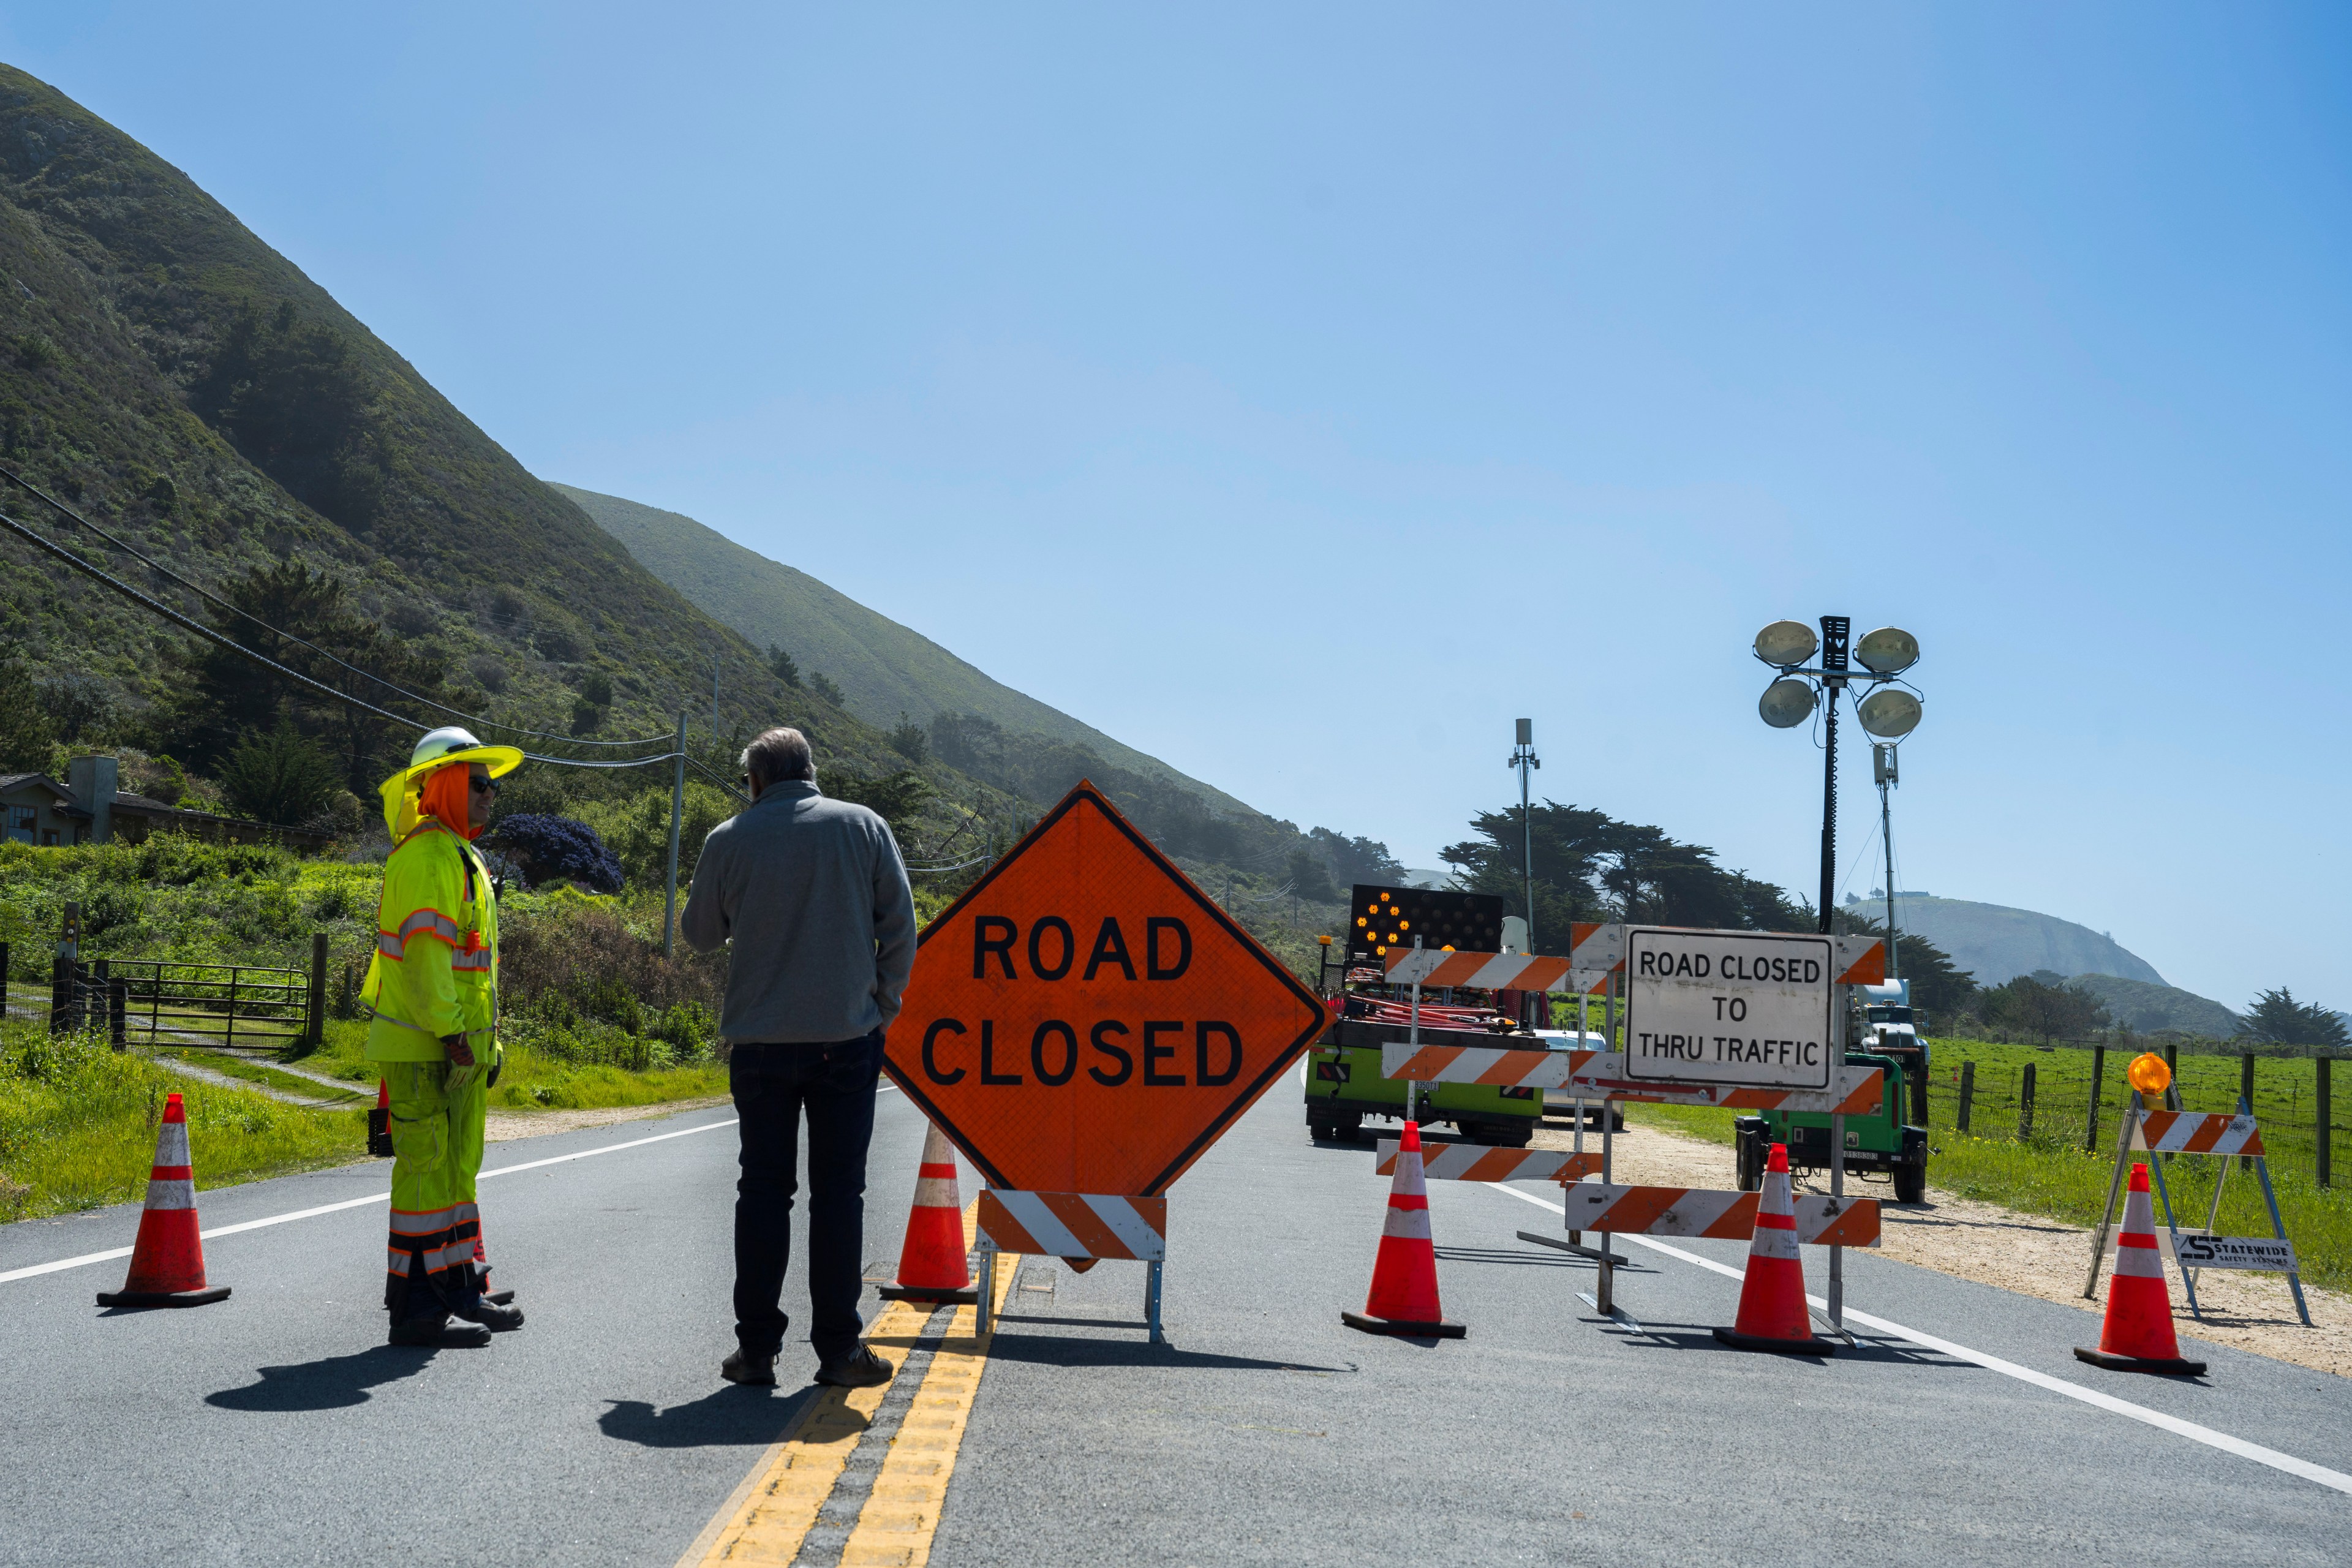 A road worker in hi-vis gear and a person stand by a &quot;ROAD CLOSED&quot; sign amidst traffic cones and barriers, with a green hill in the background.